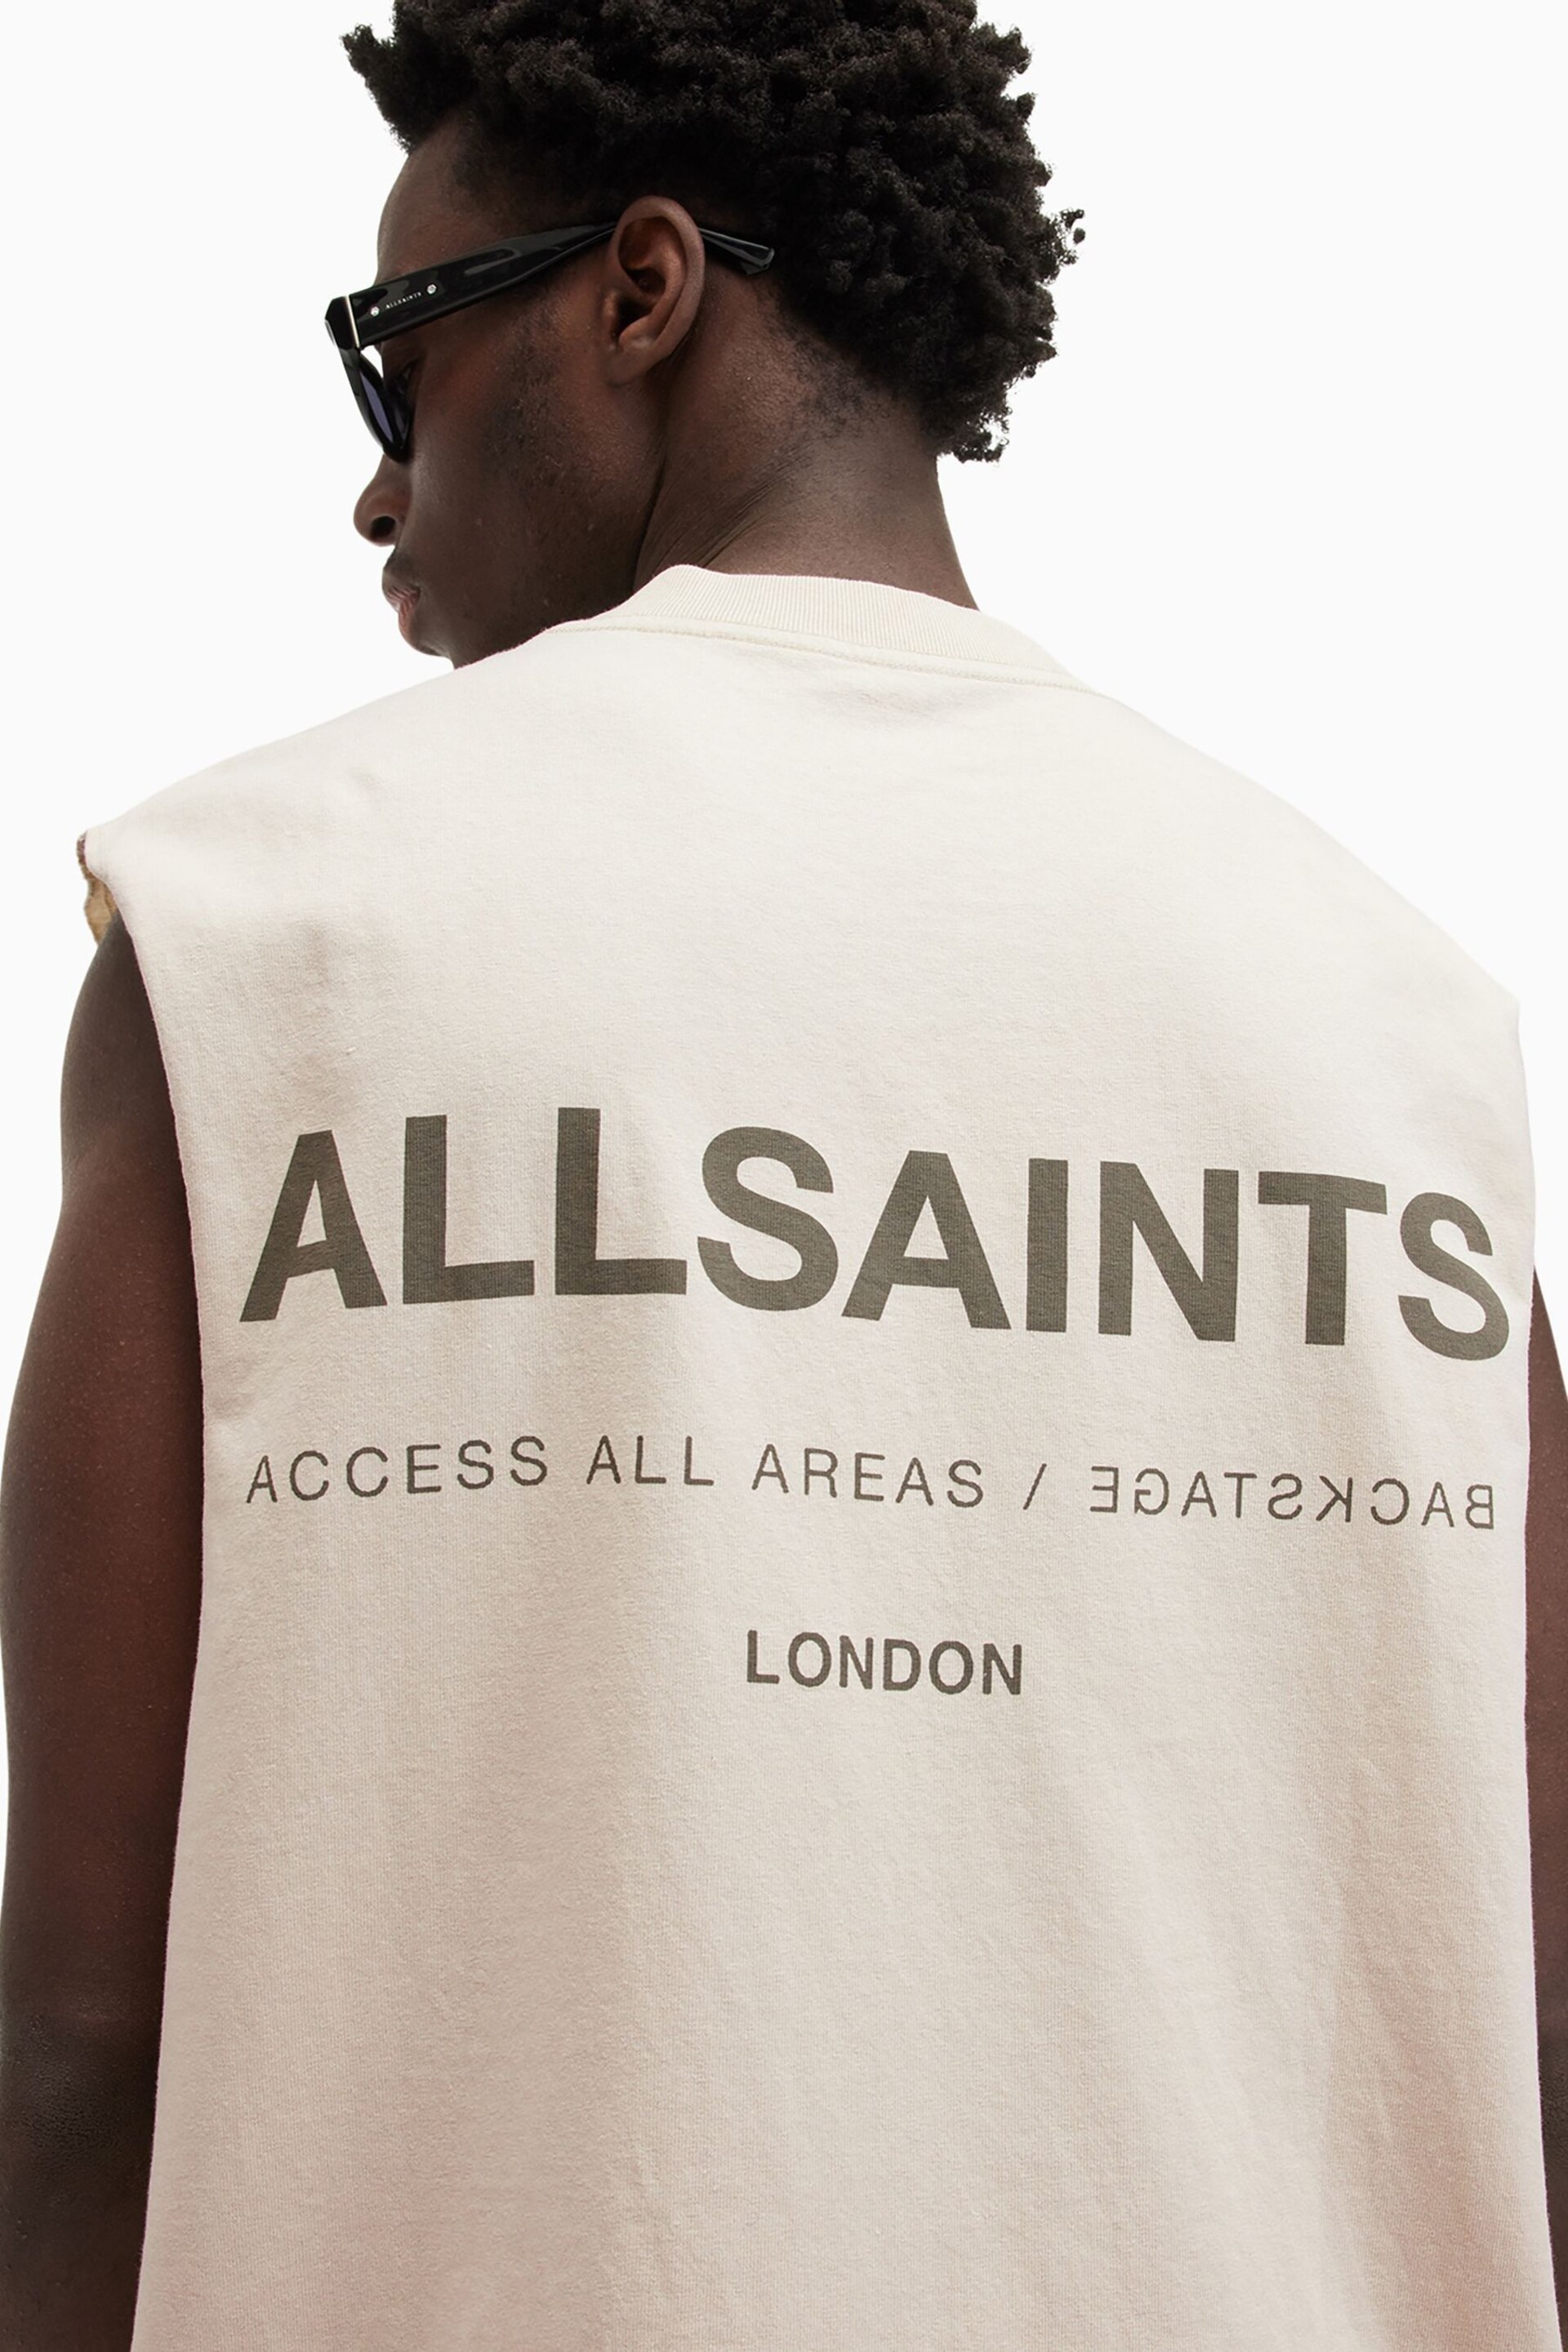 AllSaints Nude Access Short Sleeve Crew T-Shirt - Image 5 of 8